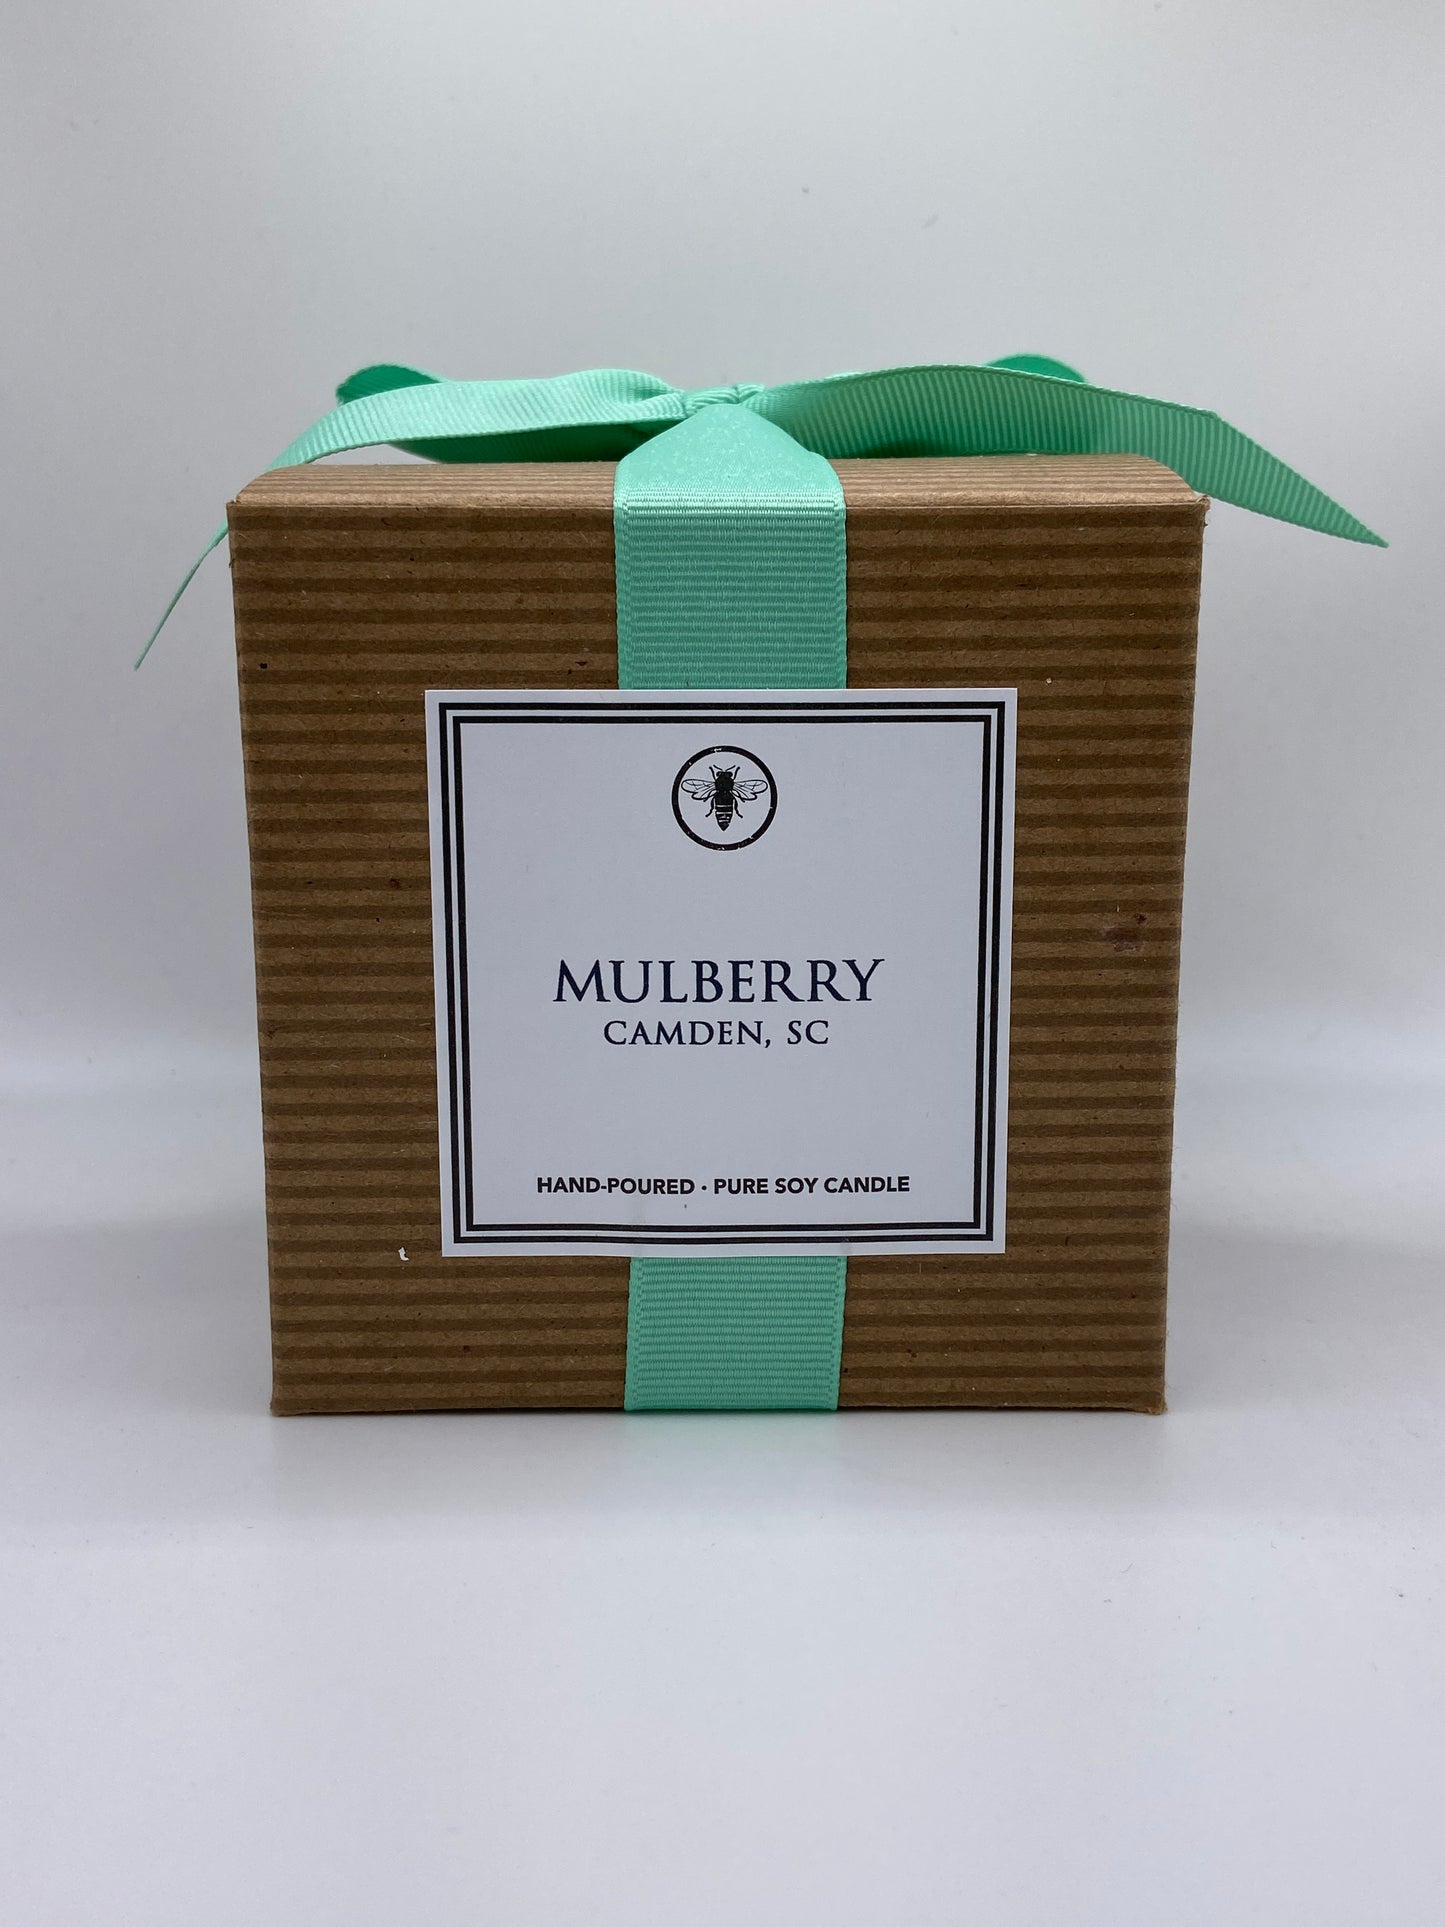 The Mulberry Candle